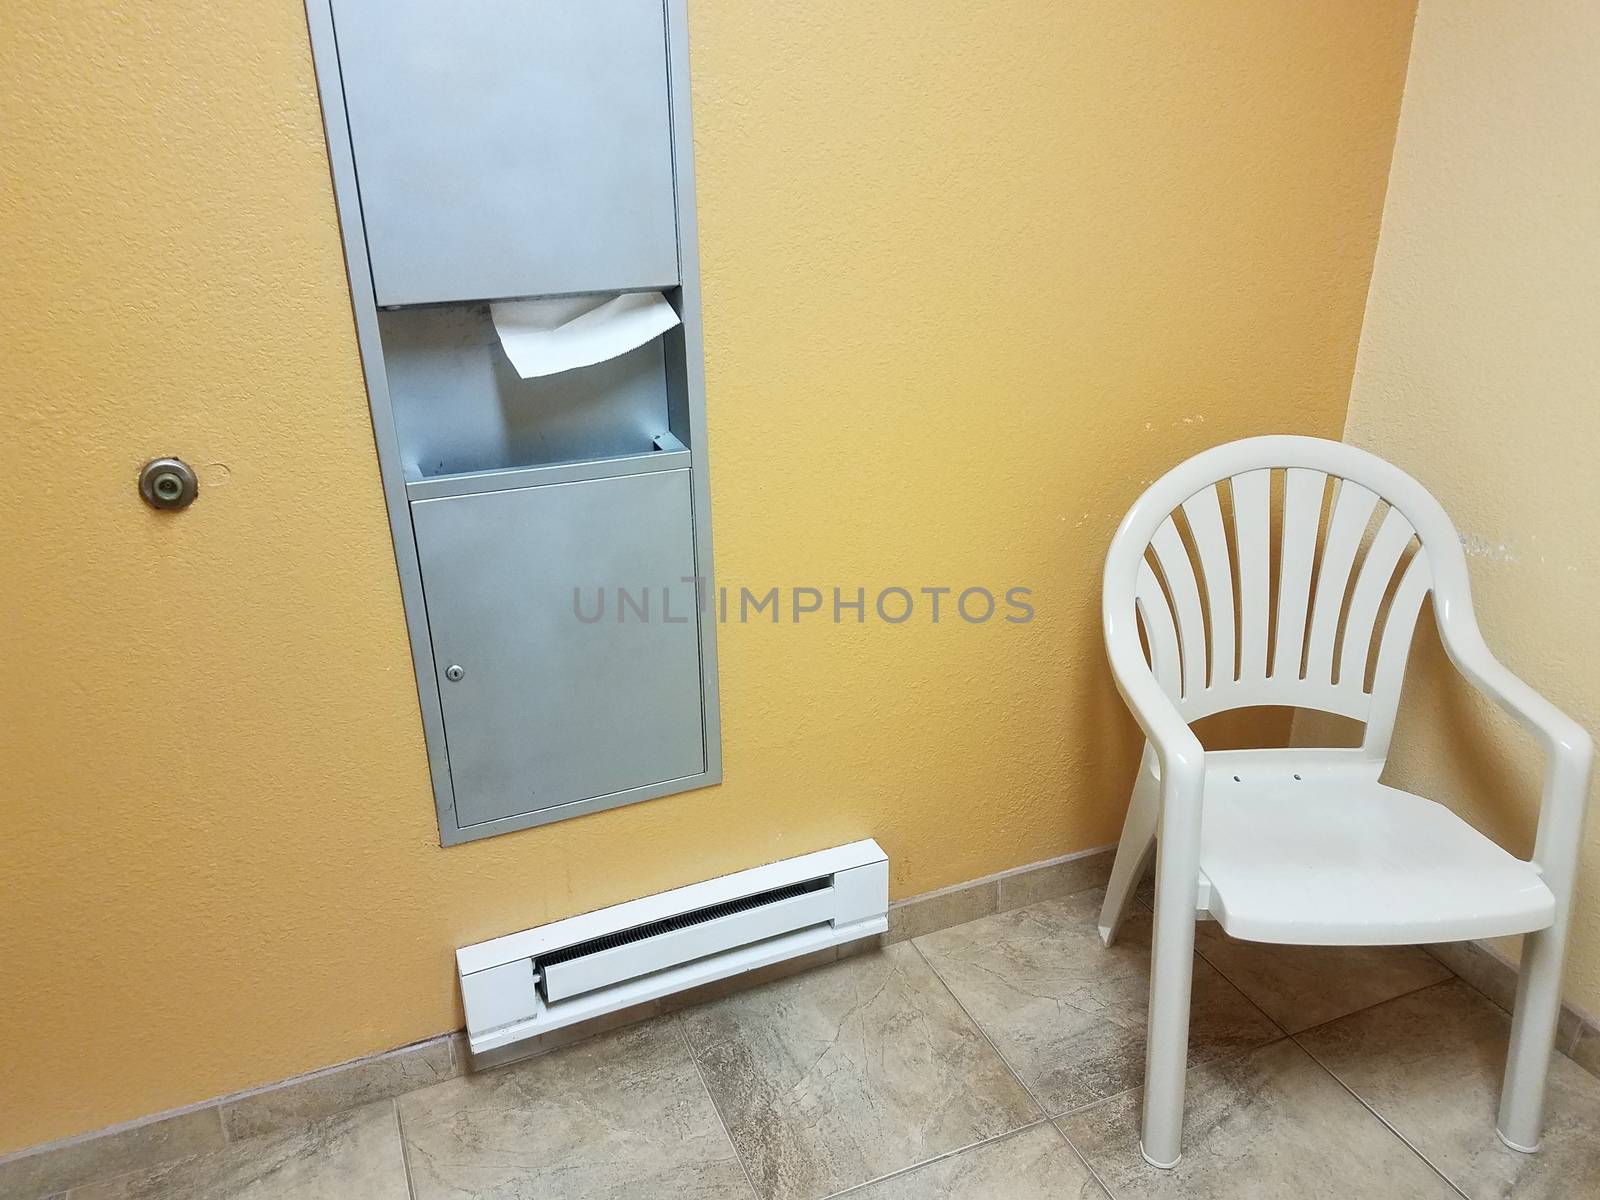 heater with paper towel dispenser and chair in bathroom or restroom